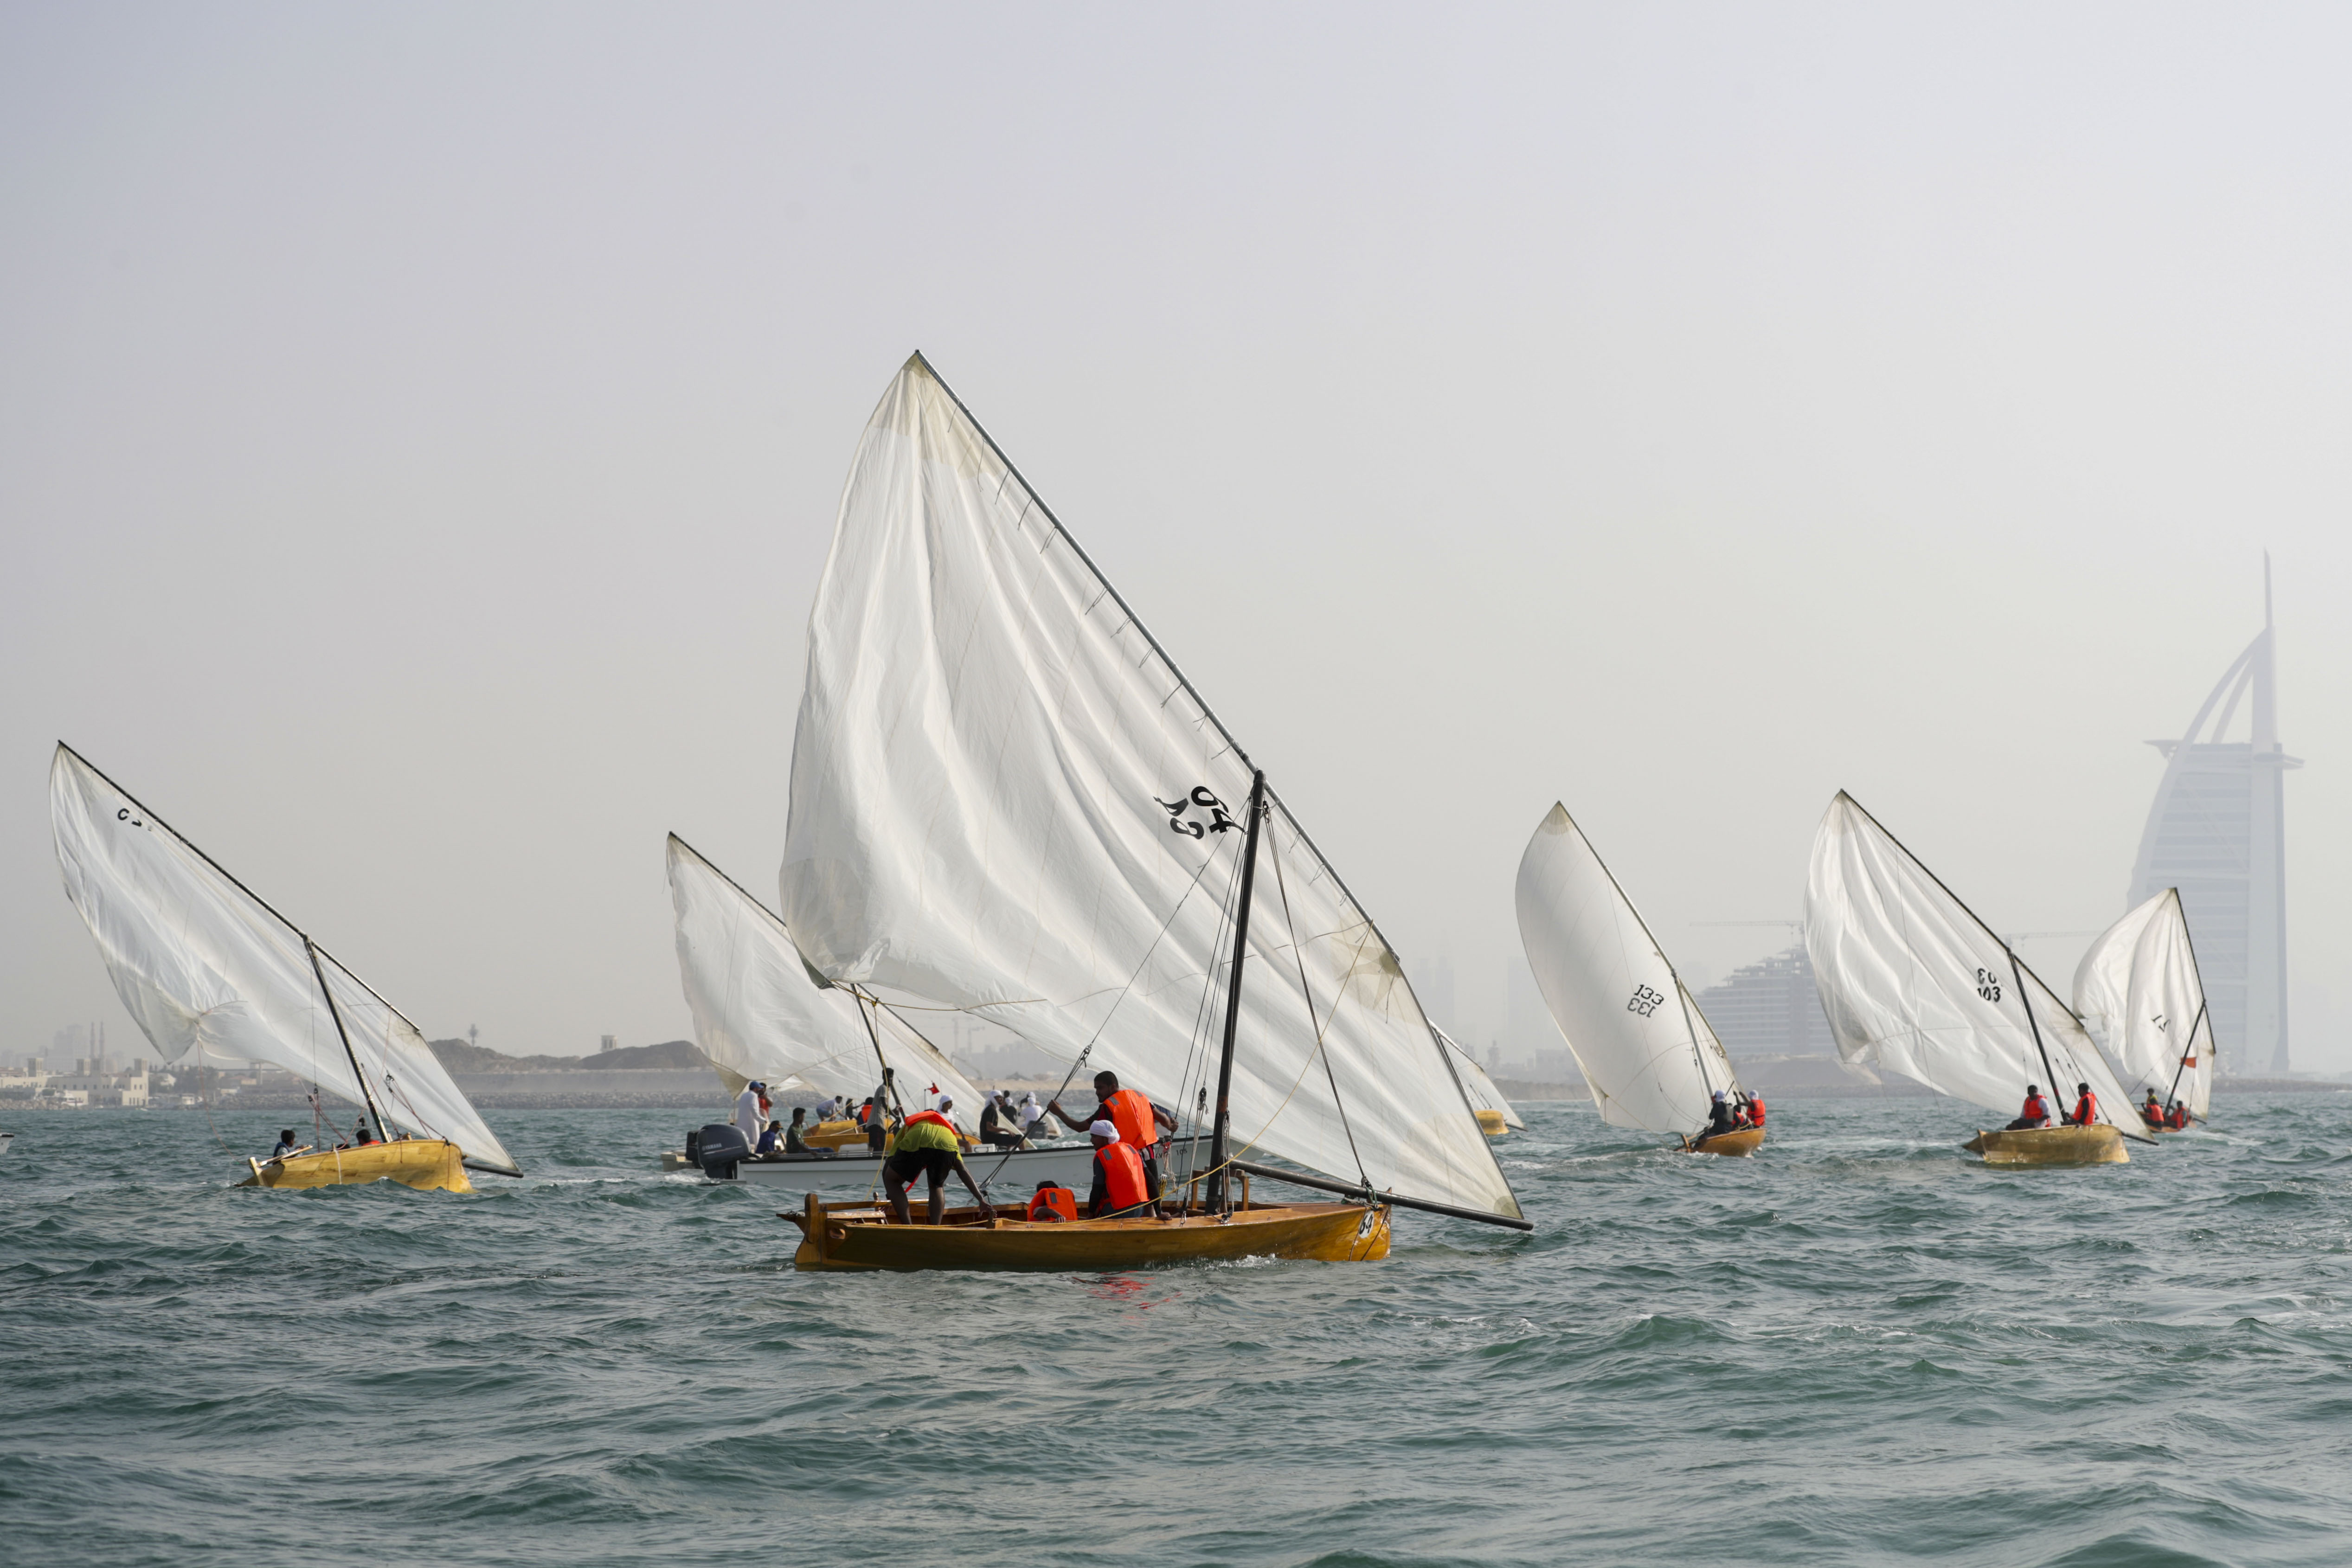 57 boats are vying for the title in the 22ft Dhow Sailing Race on Jumeirah Shore